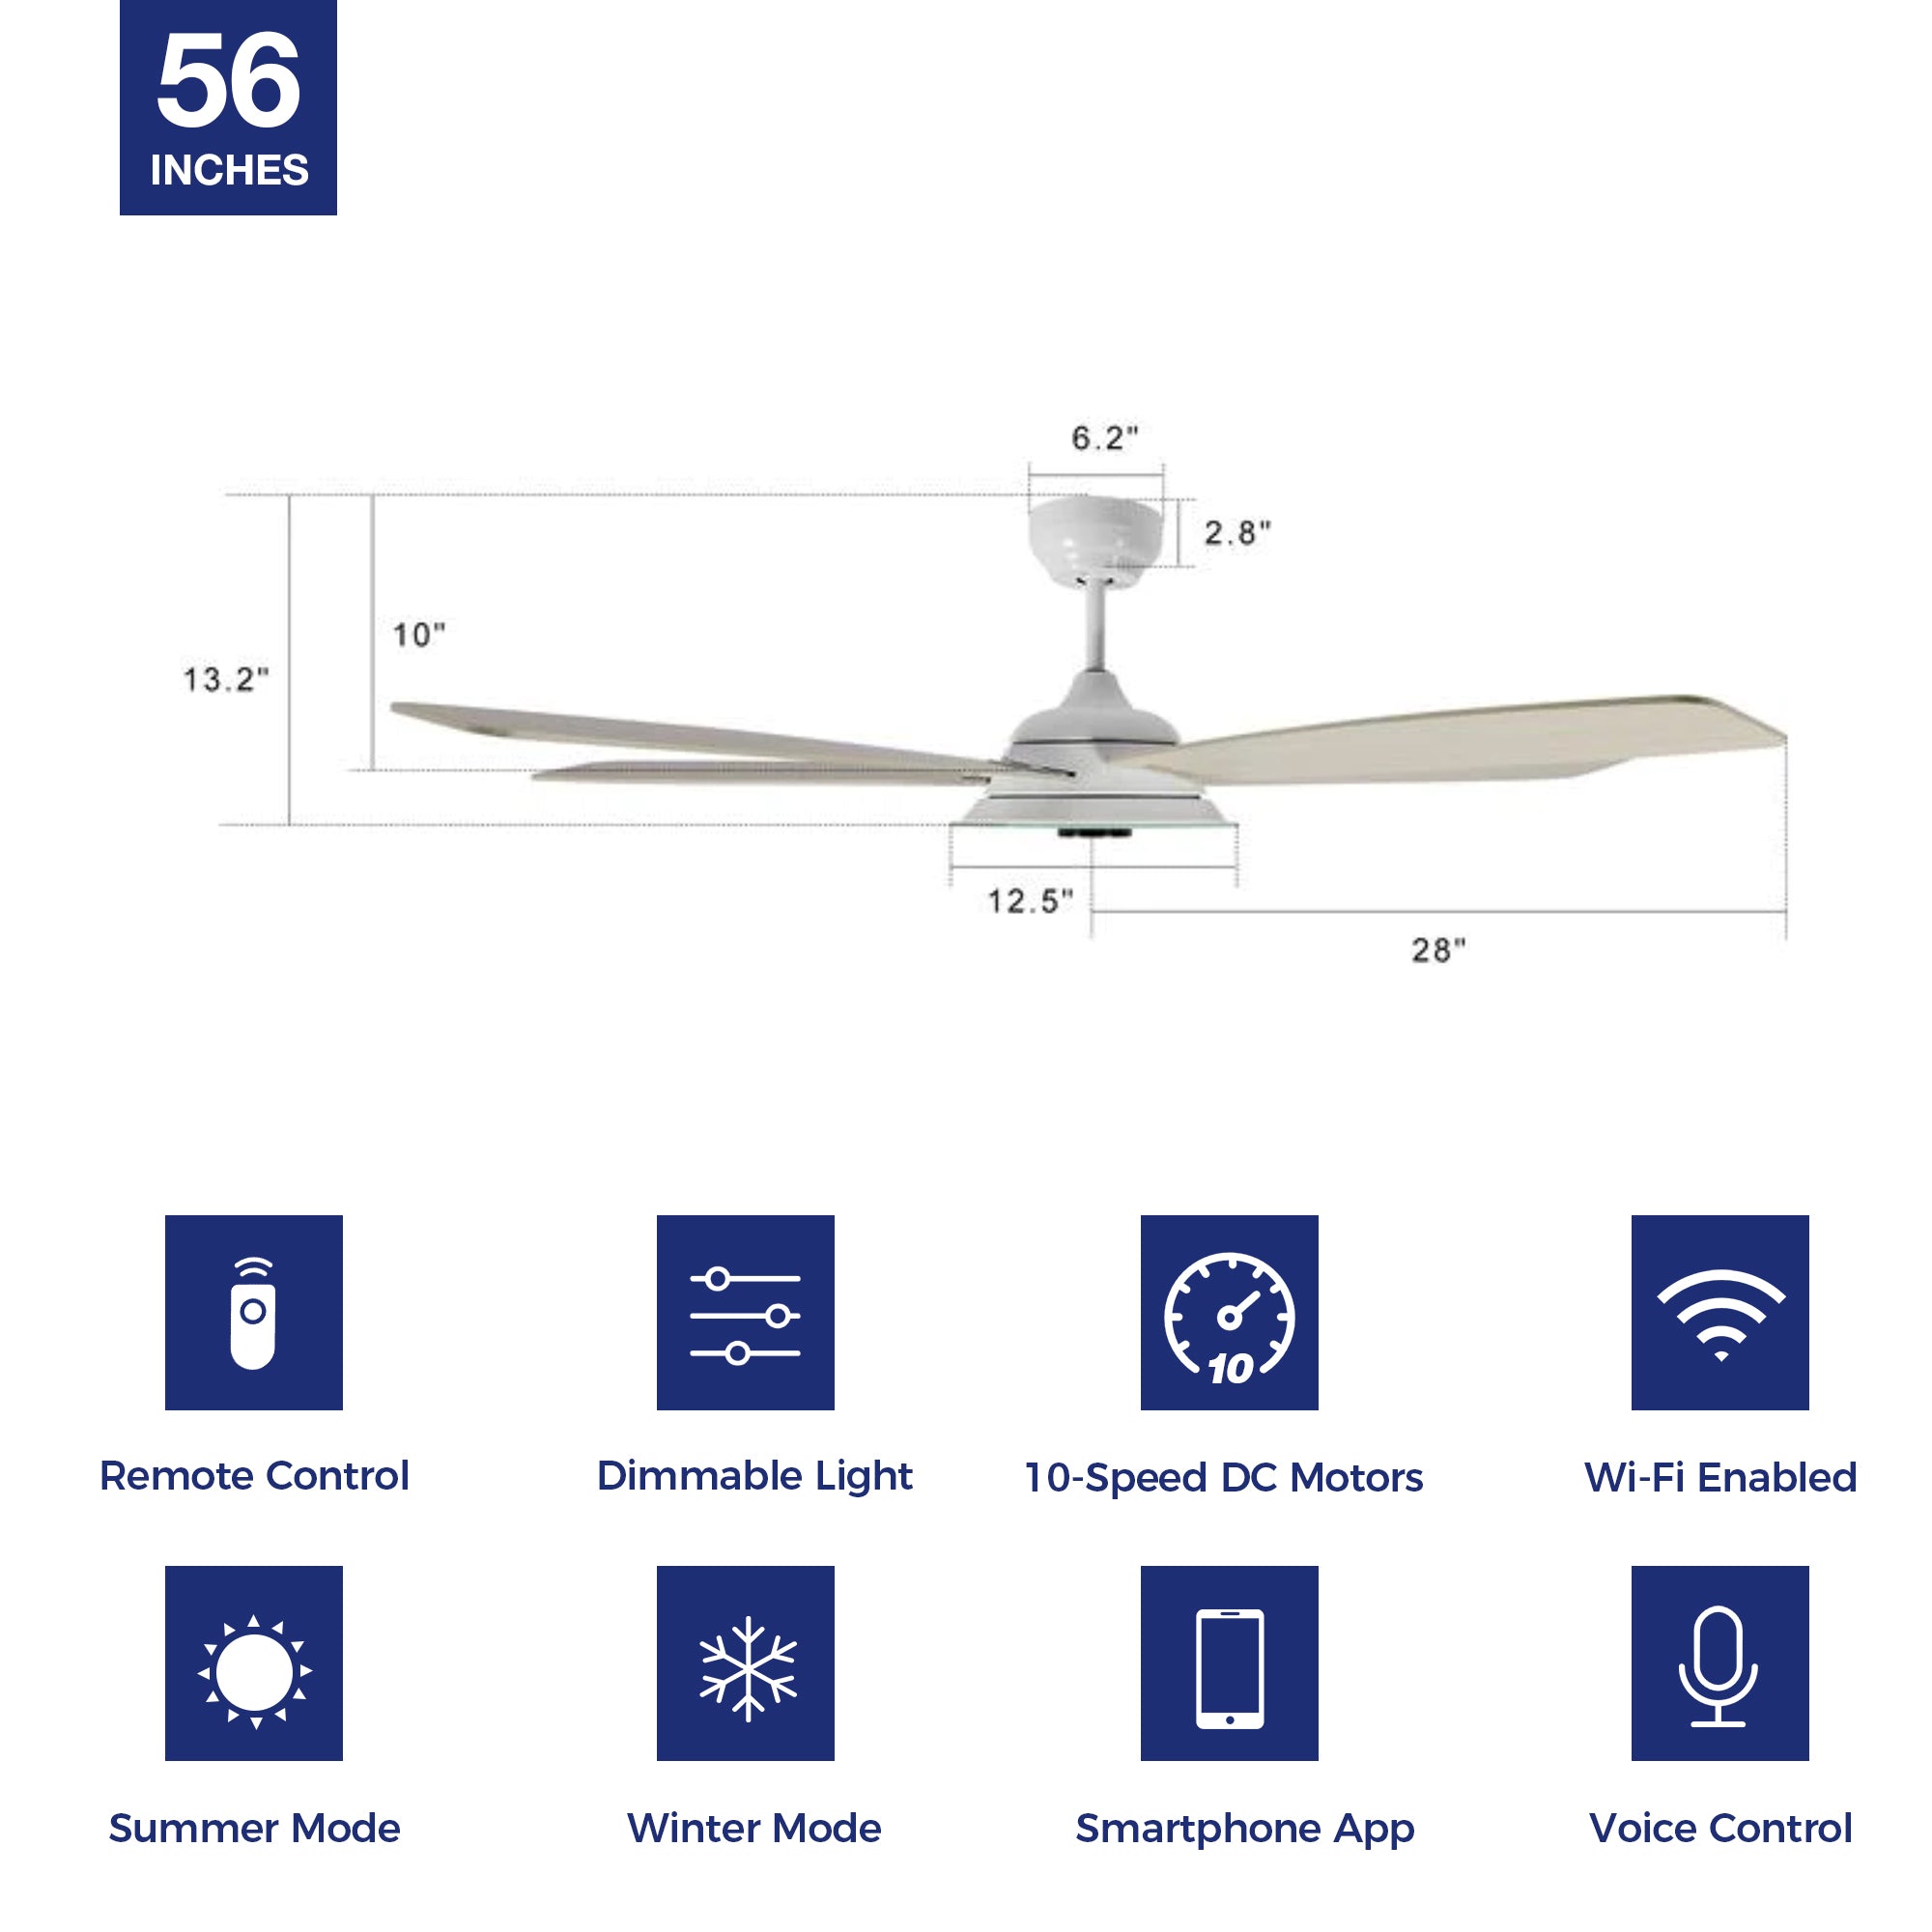 Striker Outdoor 56&quot; Smart Ceiling Fan with LED Light Kit-White Case and light-color Wood Fan Blades. The fan features Remote control, Wi-Fi apps, and Voice control technology (compatible with Amazon Alexa and Google Home Assistant ) to set fan preferences. Equipped with 3576-lumen dimmable LED lights and a 10-speed DC Motor (5600CFM airflow output), it brings you cool and bright. 